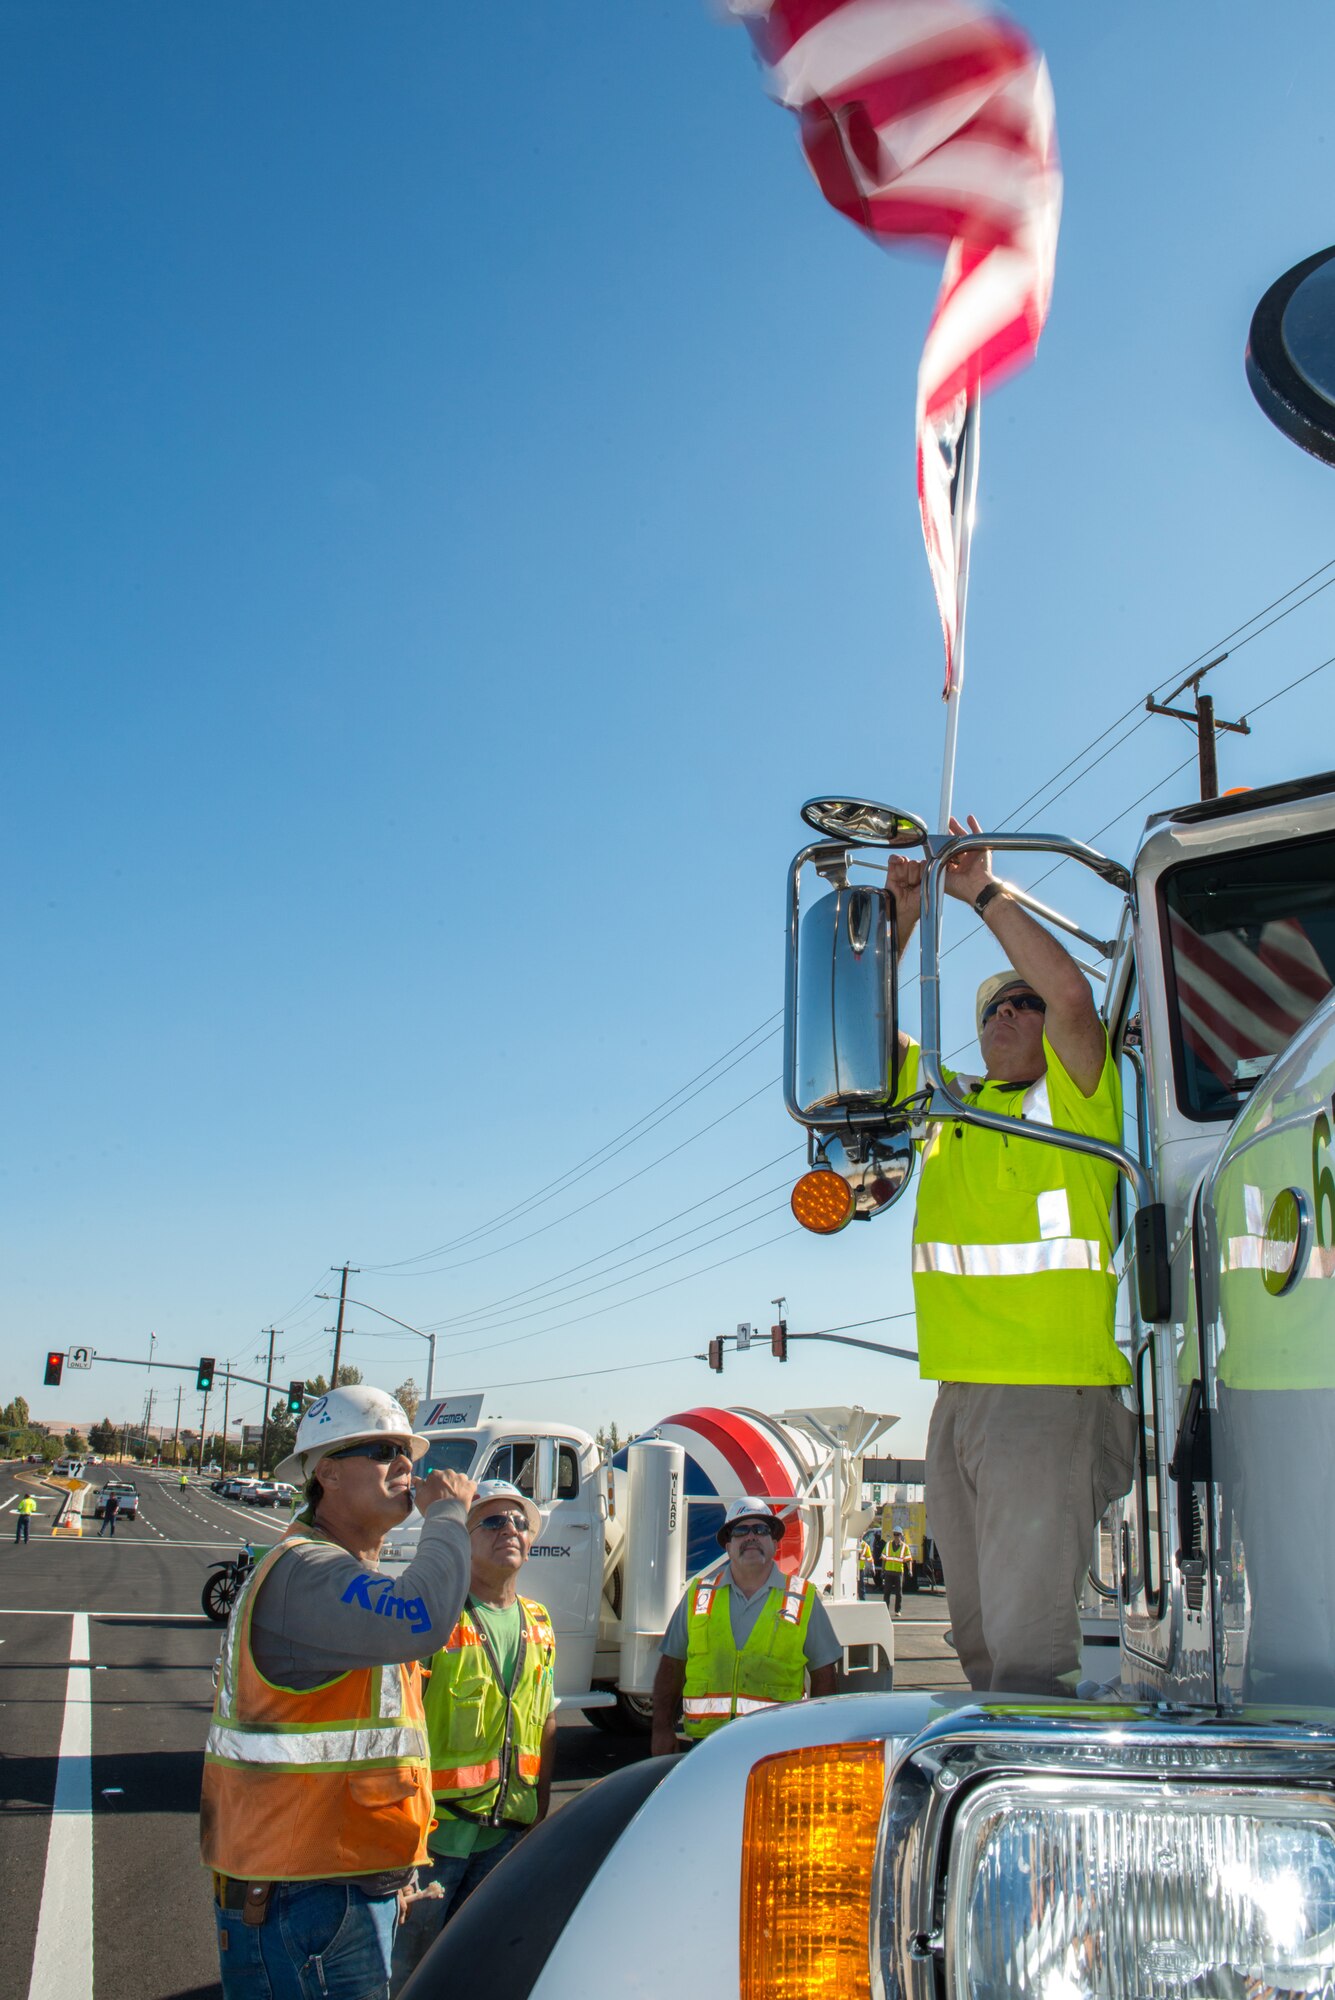 Steve Alexander, area manager for Cemex, and Bart White, construction foreman for Teichert erect the flag prior to the Peabody Road reopening ceremony in Fairfield, Calif., Aug. 4, 2016. The road was closed for 14-months and finished ten days ahead of schedule. Peabody Road is a major thoroughfare that connects the cities of Vacaville and Fairfield, more than 20,000 vehicles per day use the road and it is also a major artery into Travis Air Force Base for more than 14,000 employees. The construction of the Peabody Road overpass is part of the new Fairfield-Vacaville train station project along the Capitol Corridor. (U.S. Air Force photo by Louis Briscese) 